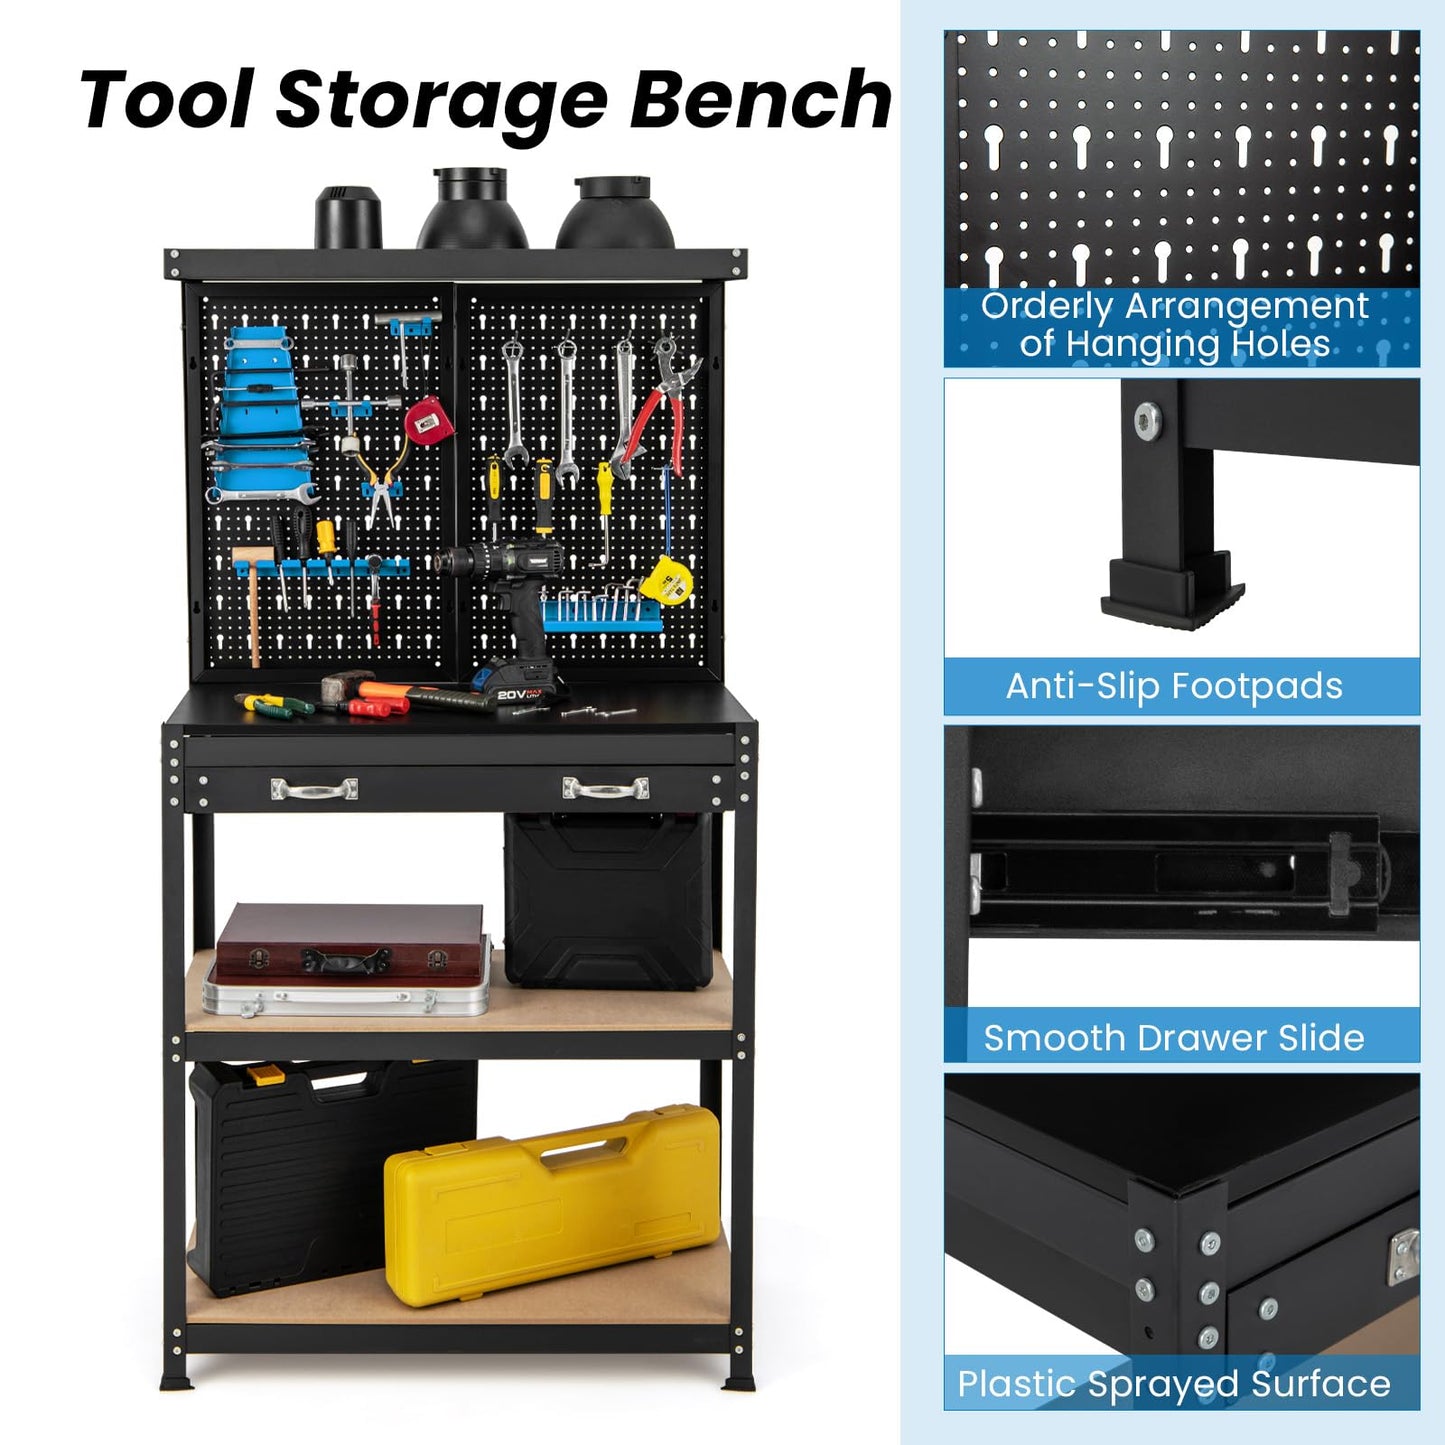 S AFSTAR Garage Workbench with Drawers, 32 x 16 Inches Tool Storage Workbench with Peg Board & 2 Lower Shelves, 14 Hanging Accessories, 220 LBS